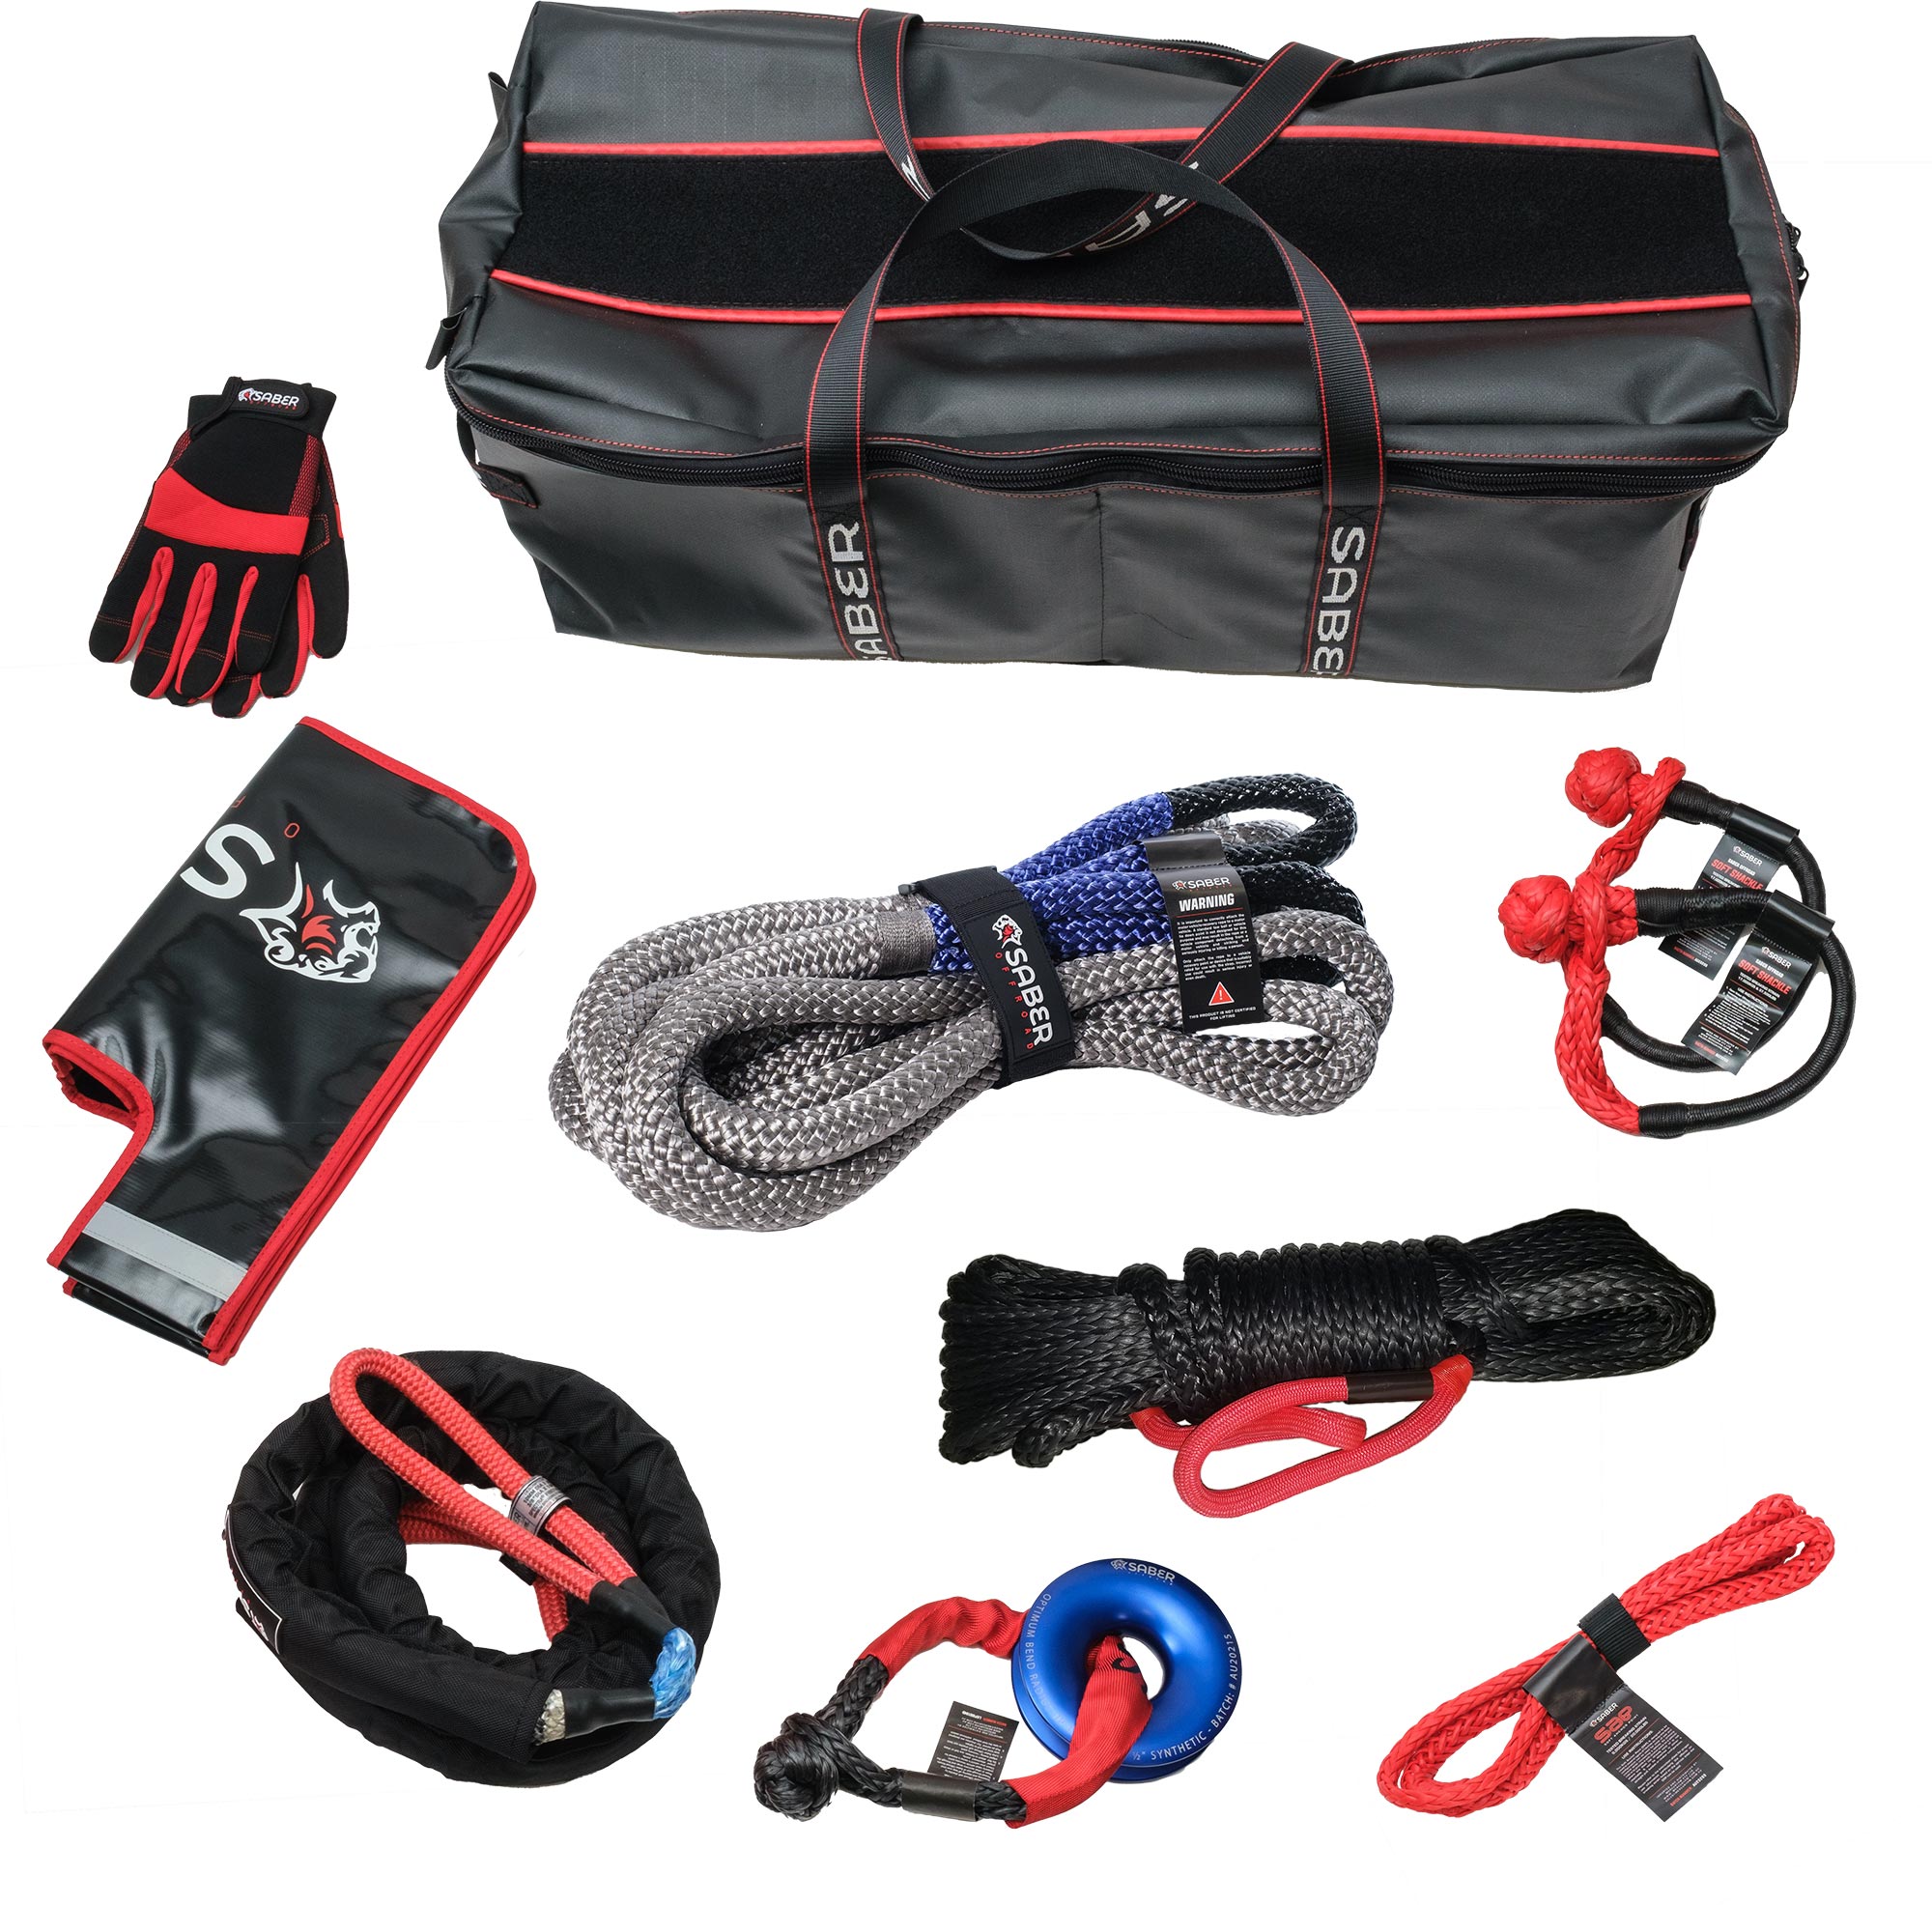 Saber-Offroad-Recovery-Kits-8K-Ultimate-Kit-with-Recovery-Bag-New-Rope.jpg